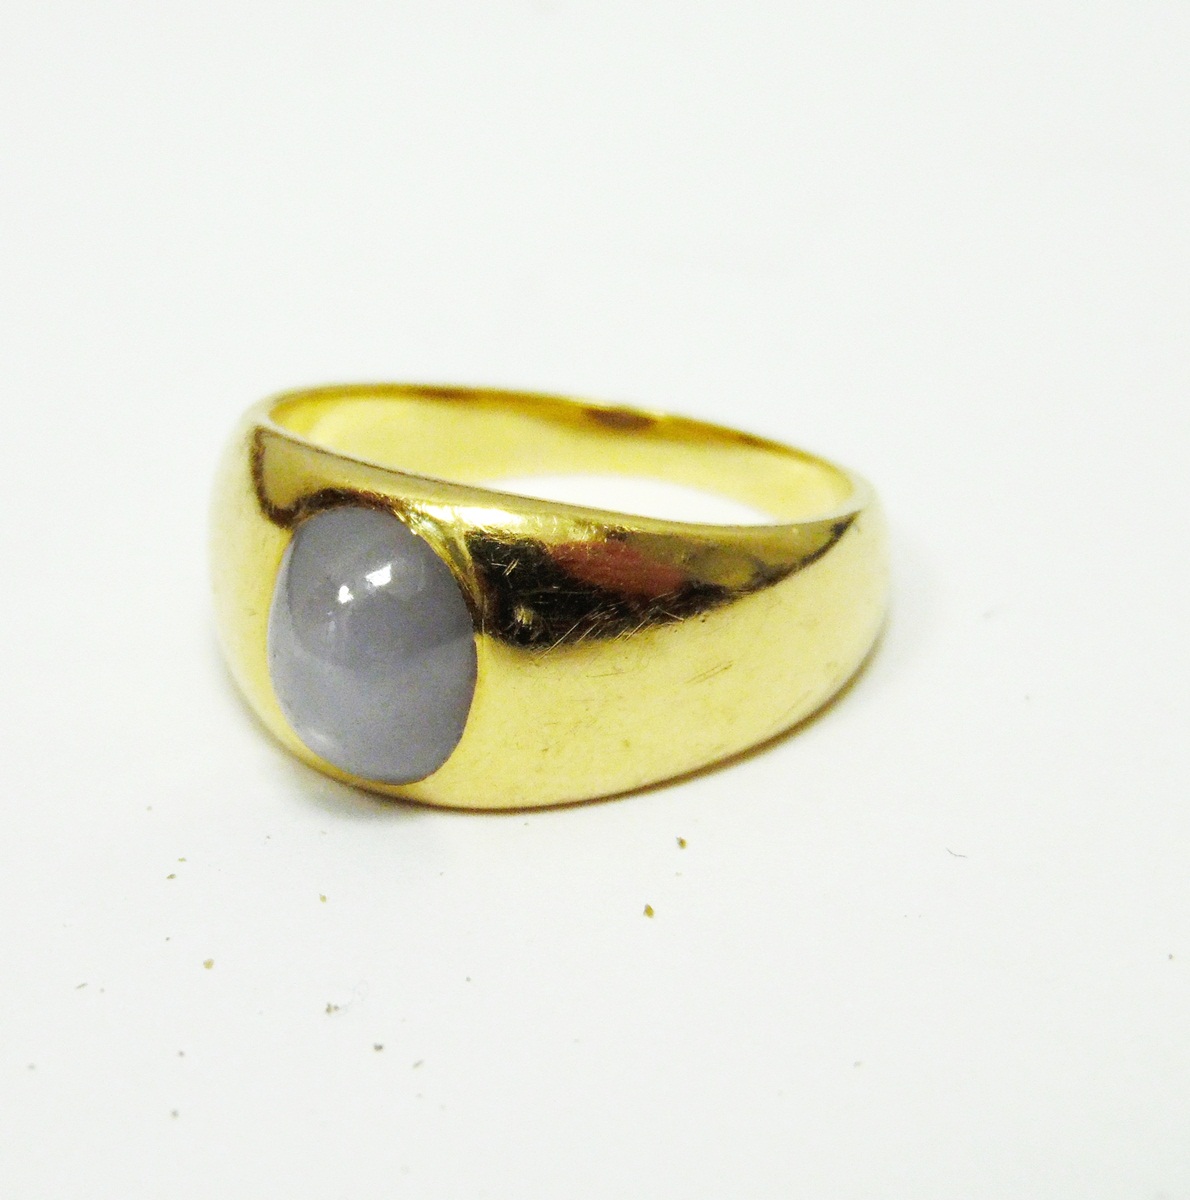 Gentleman's gold-coloured gemset ring, the central cabochon stone showing asterism, - Image 2 of 2